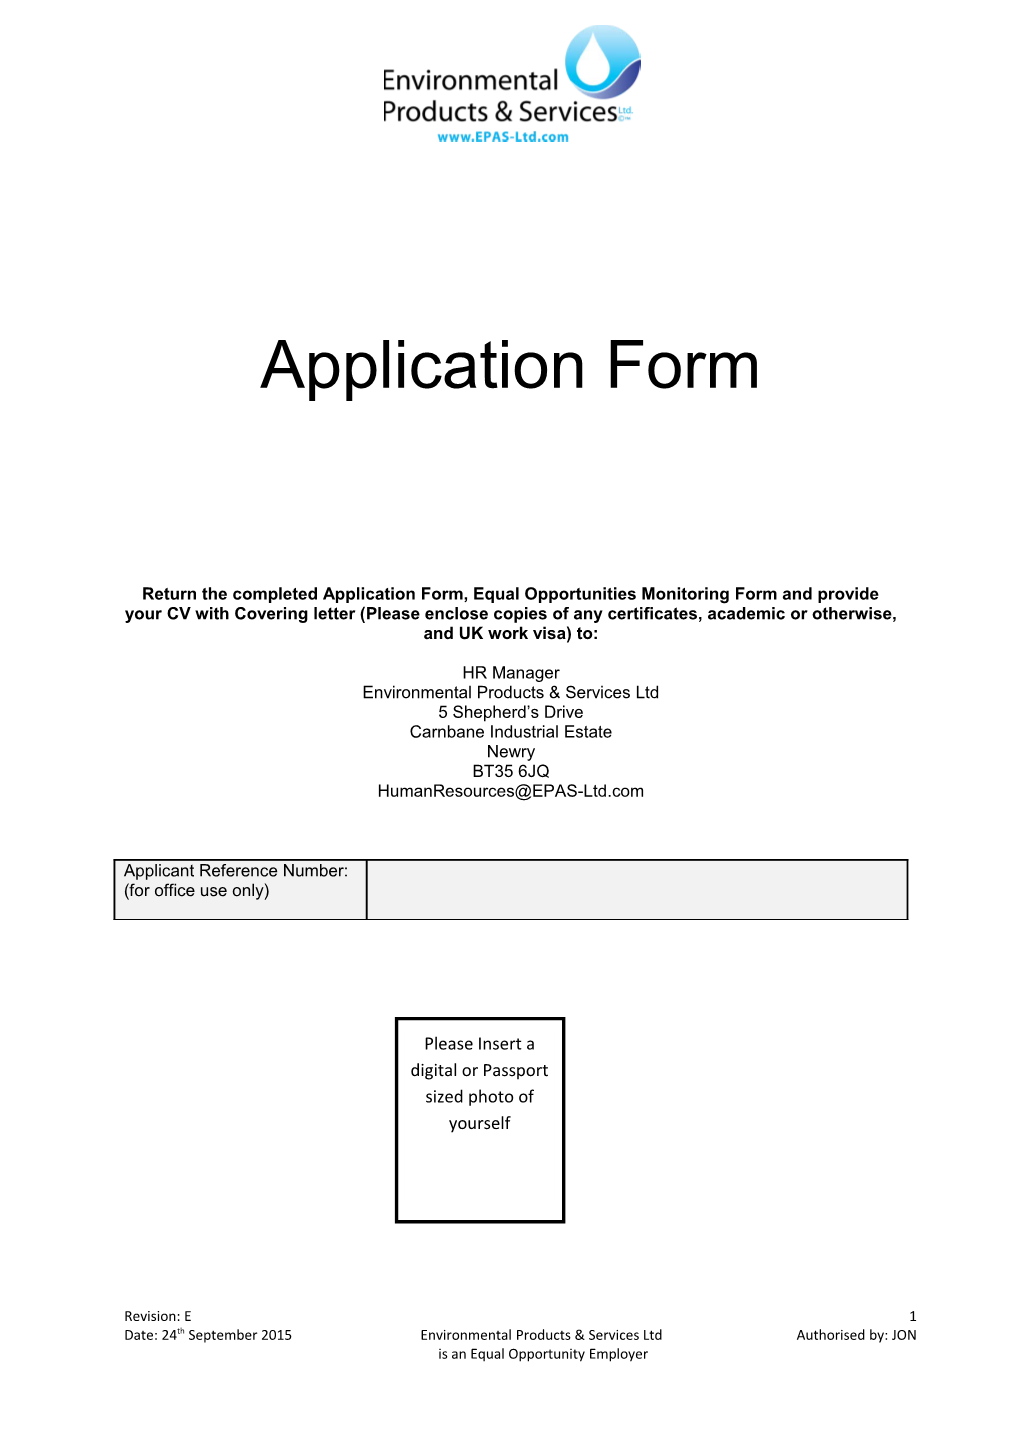 Return the Completed Application Form, Equal Opportunities Monitoring Form and Provide